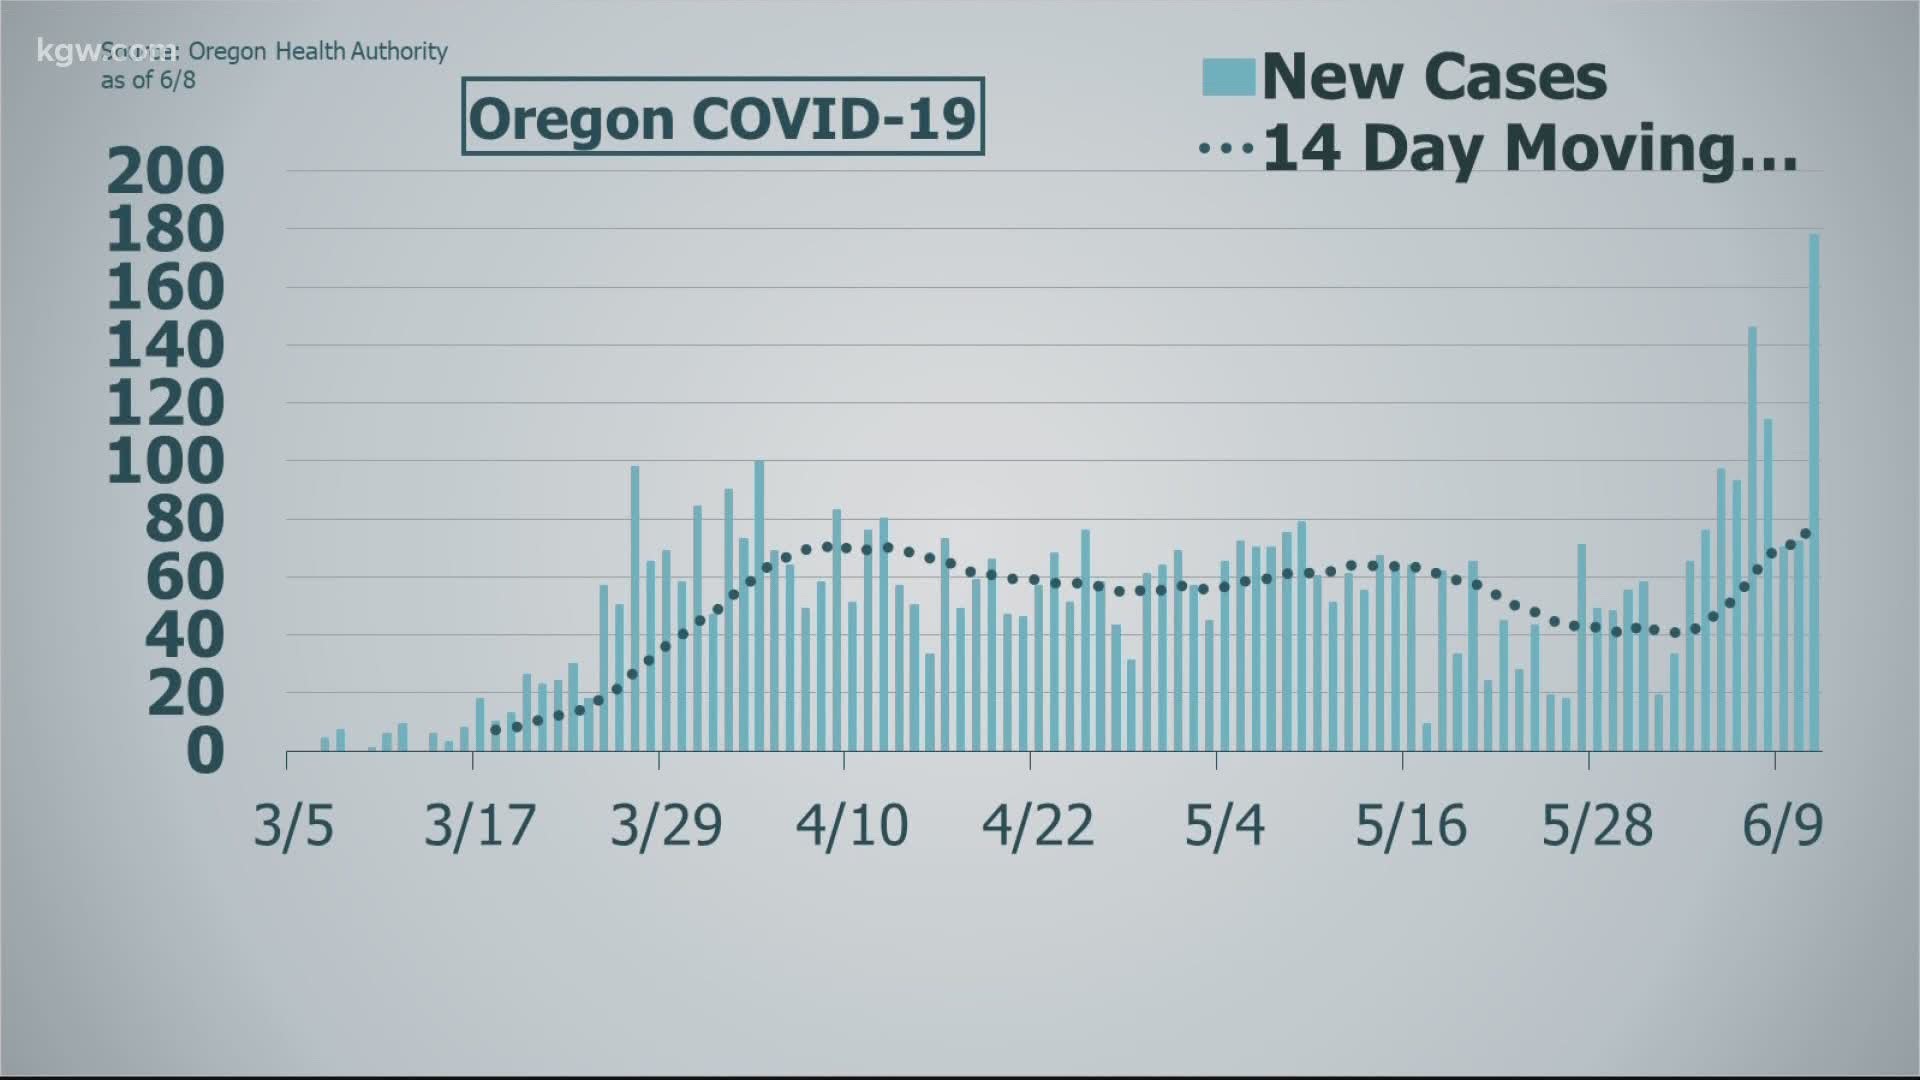 Oregon health officials reported 178 new confirmed and presumptive COVID-19 cases, the highest single-day total since the pandemic began.